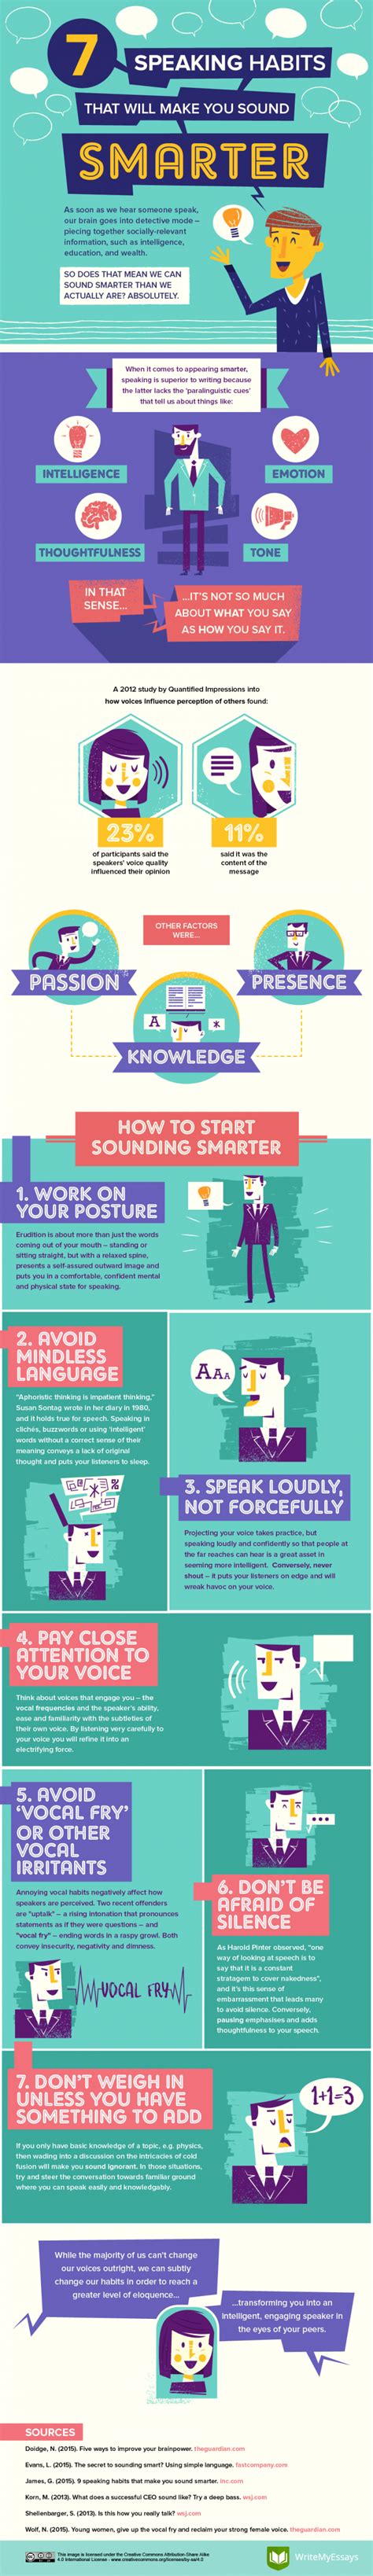 Speaking Habits To Make You Sound Smarter Daily Infographic Public Speaking Tips Speaking